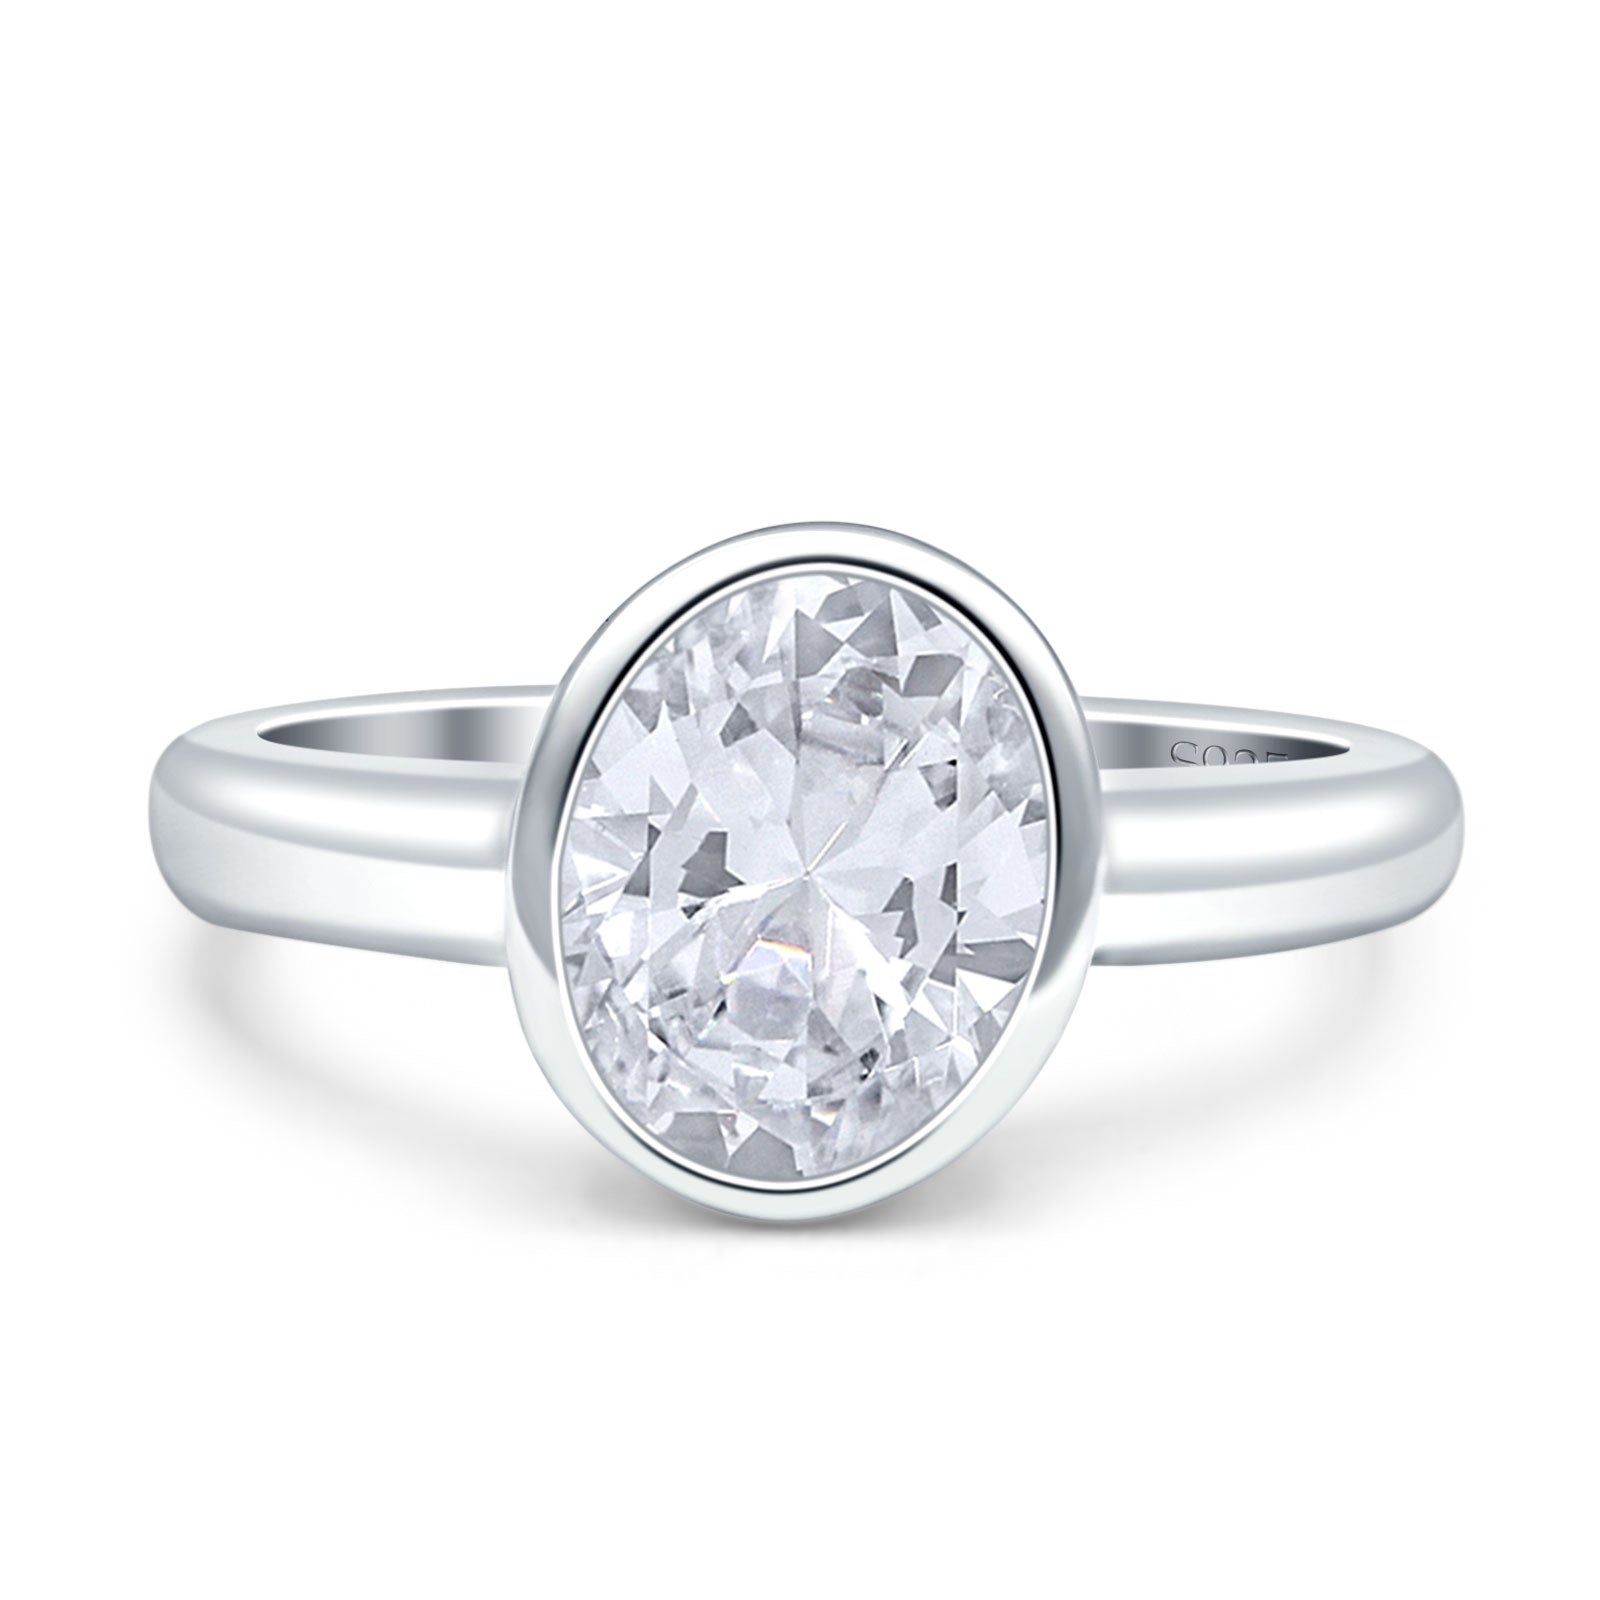 iced out bling 5a cz engagement| Alibaba.com